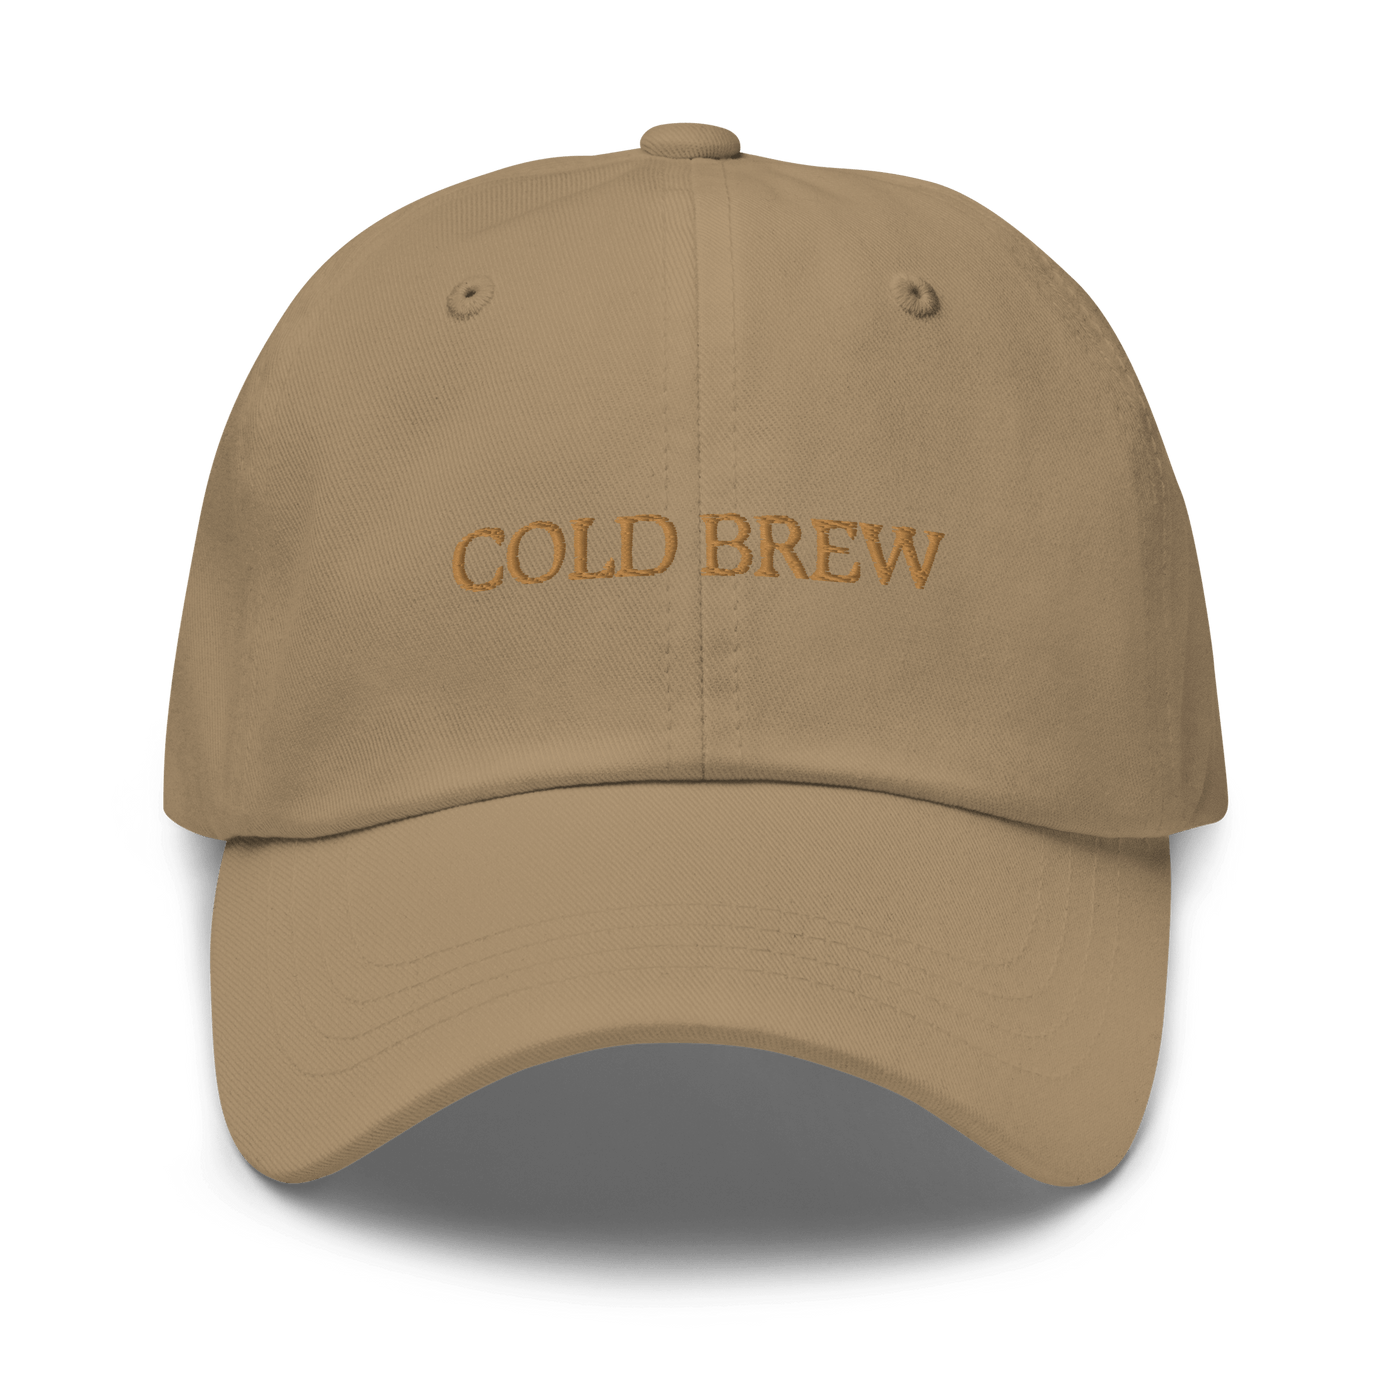 Cold Brew Dad hat - Khaki - - Just Another Cap Store